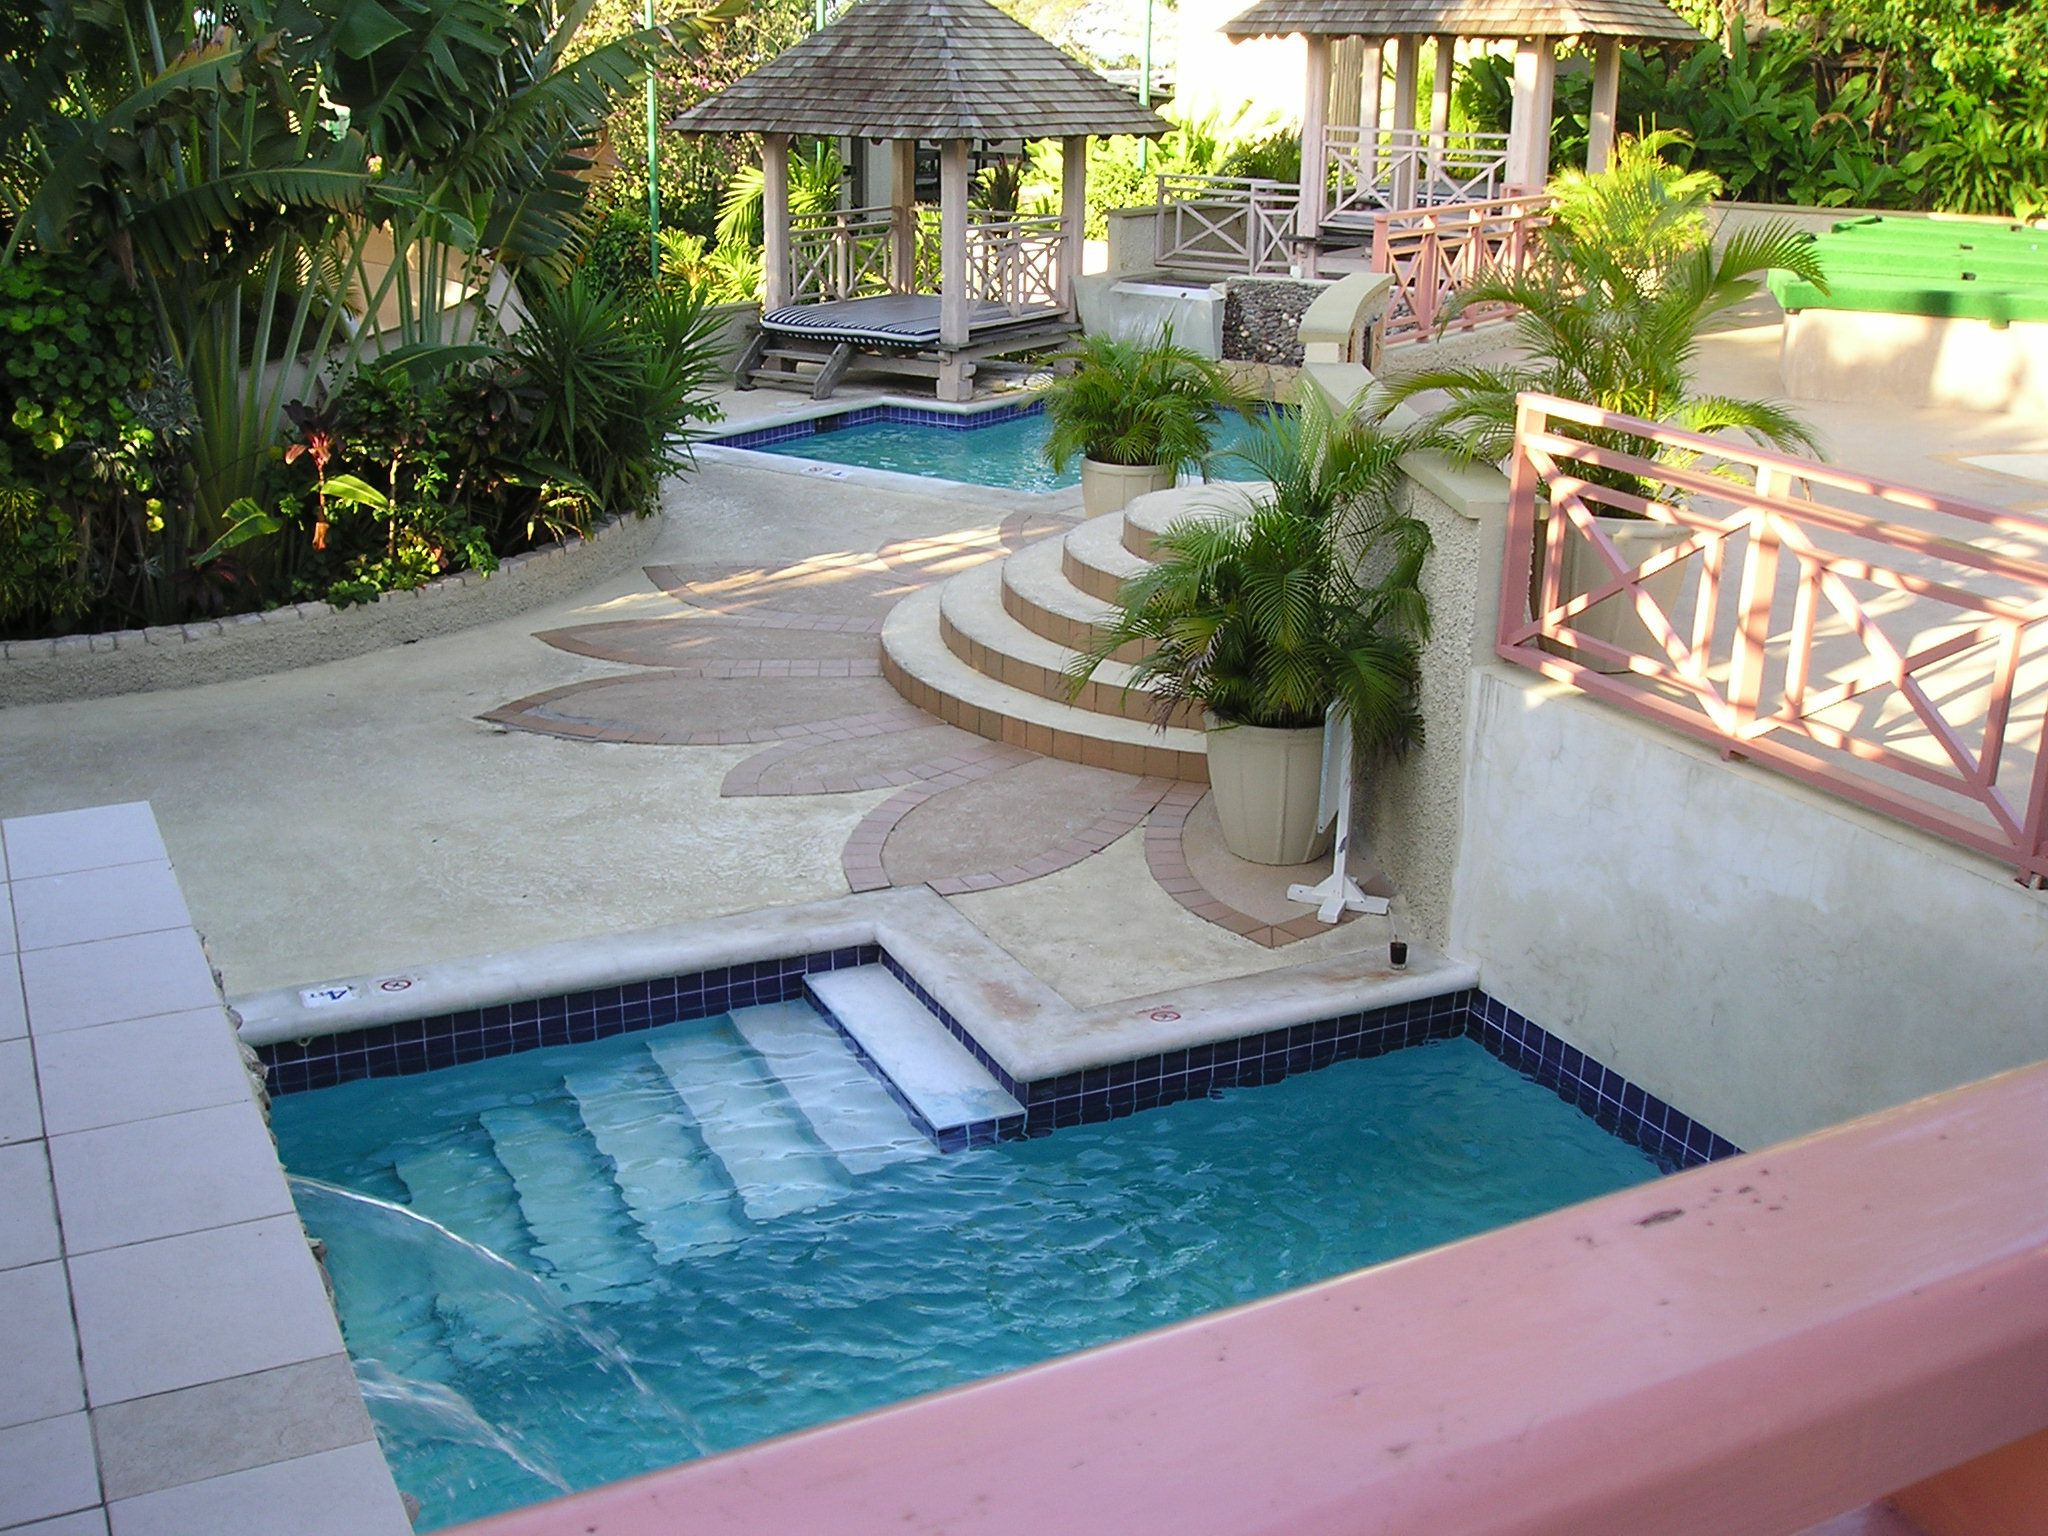 Pools For Small Backyard
 Small Pool Designs for Limited Modern Backyard to Try